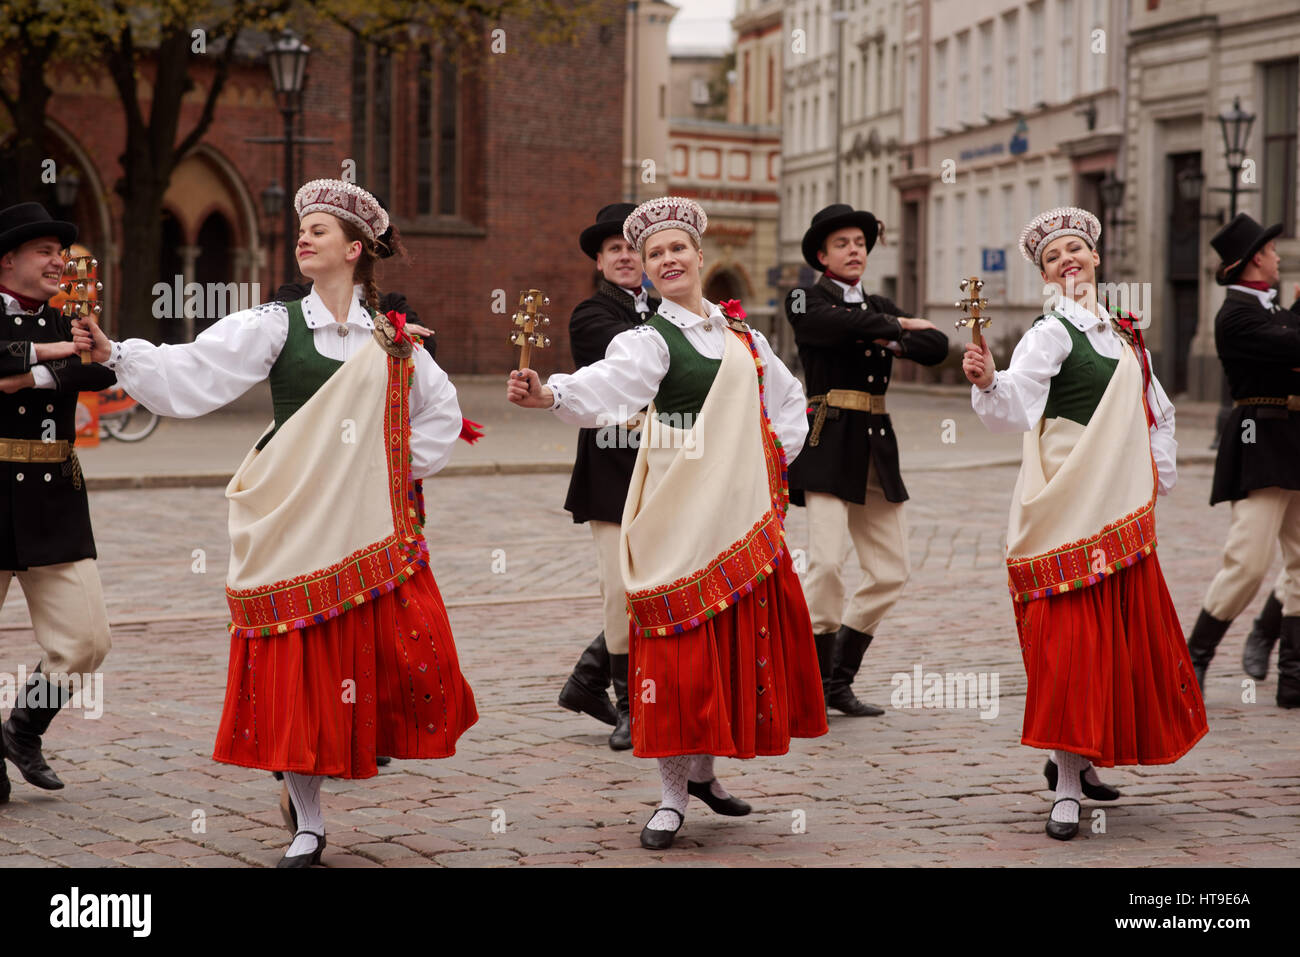 Dancers in national costumes performs on the Dome square in Riga, Latvia Stock Photo